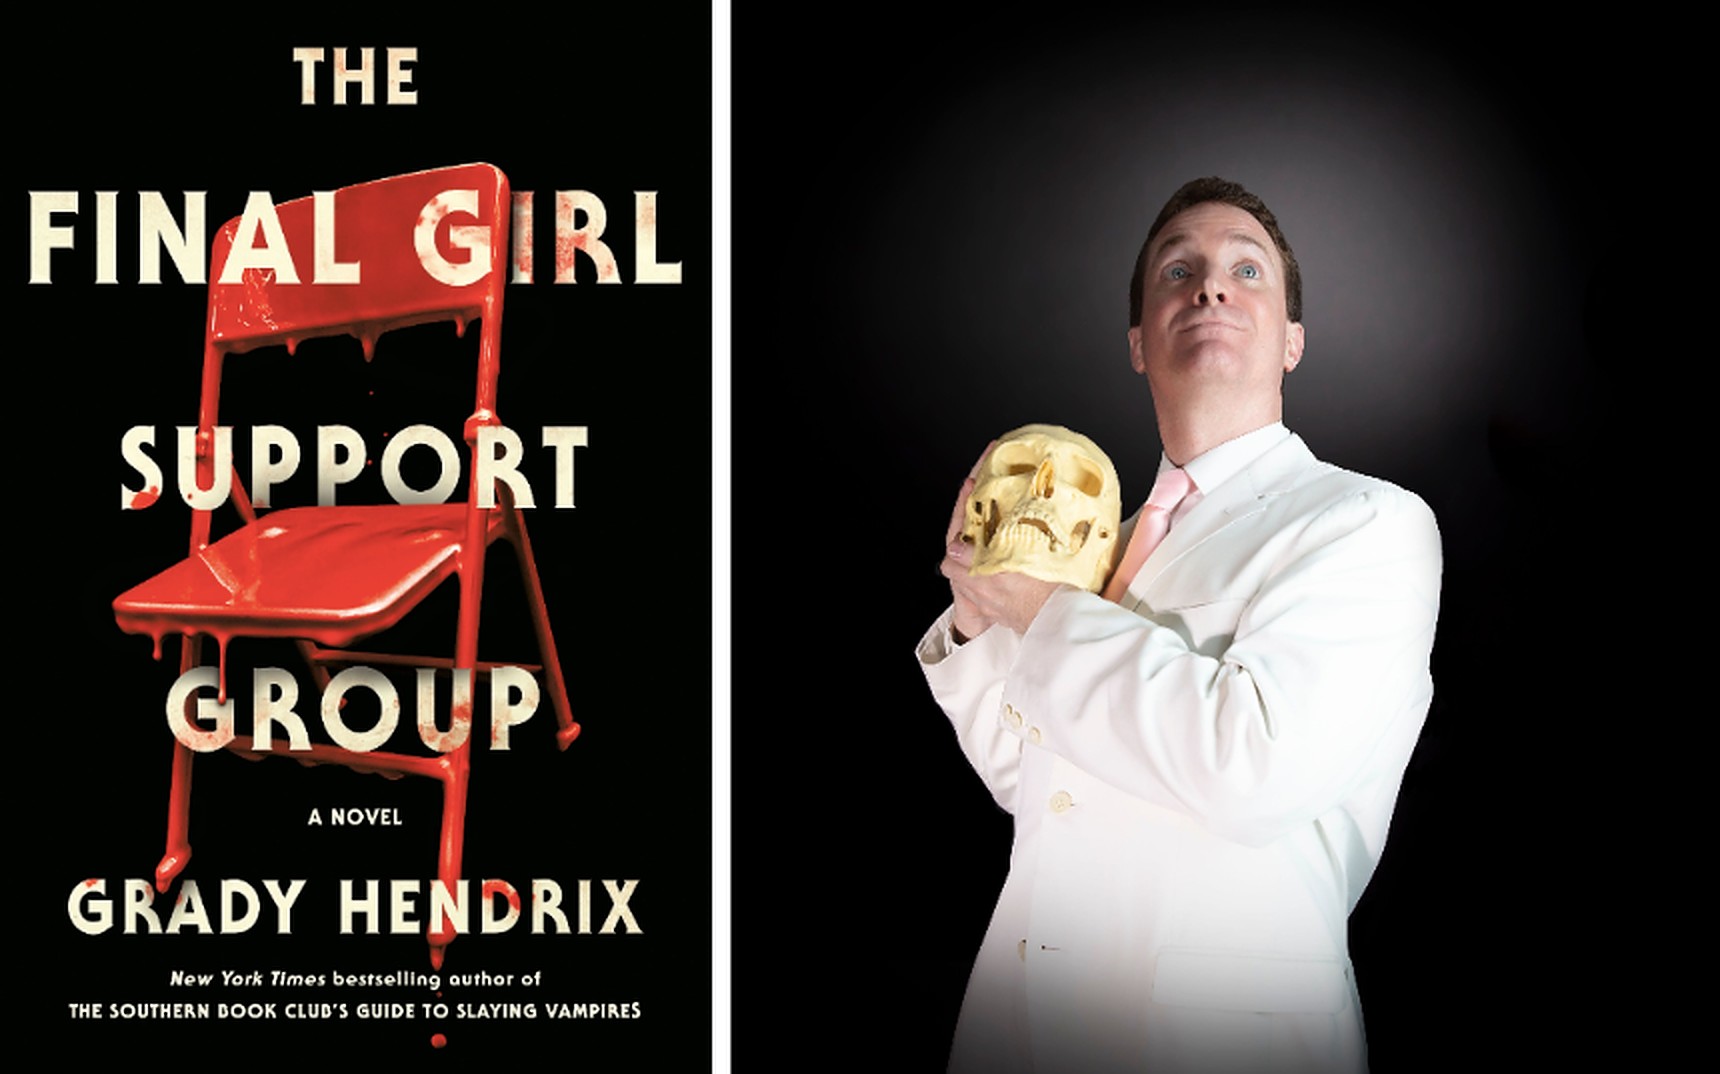 An interview with 'The Final Girl Support Group' author Grady Hendrix